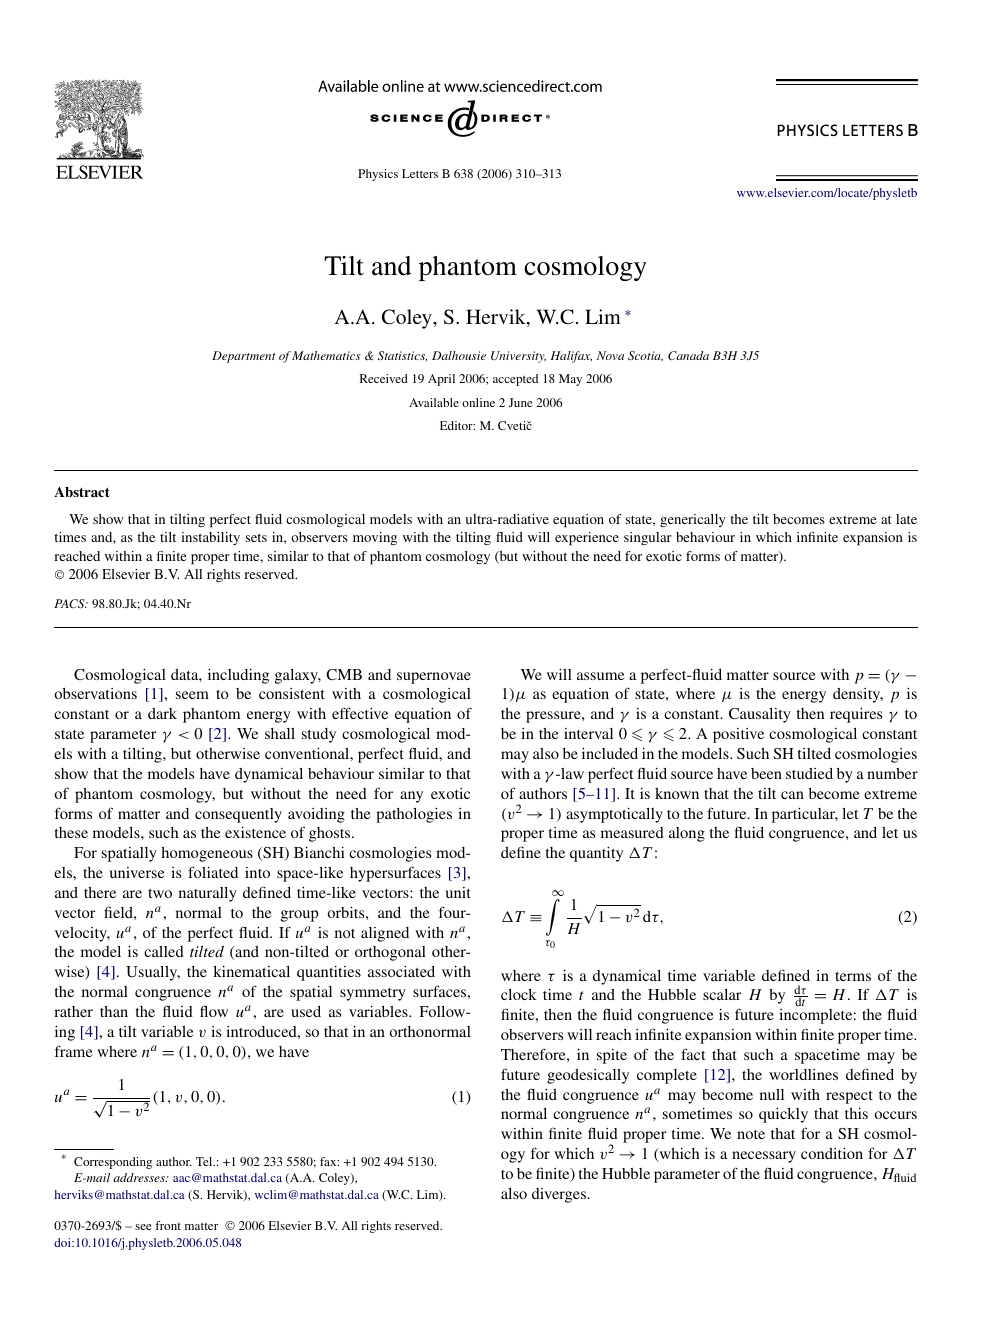 Tilt And Phantom Cosmology Topic Of Research Paper In Physical Sciences Download Scholarly Article Pdf And Read For Free On Cyberleninka Open Science Hub